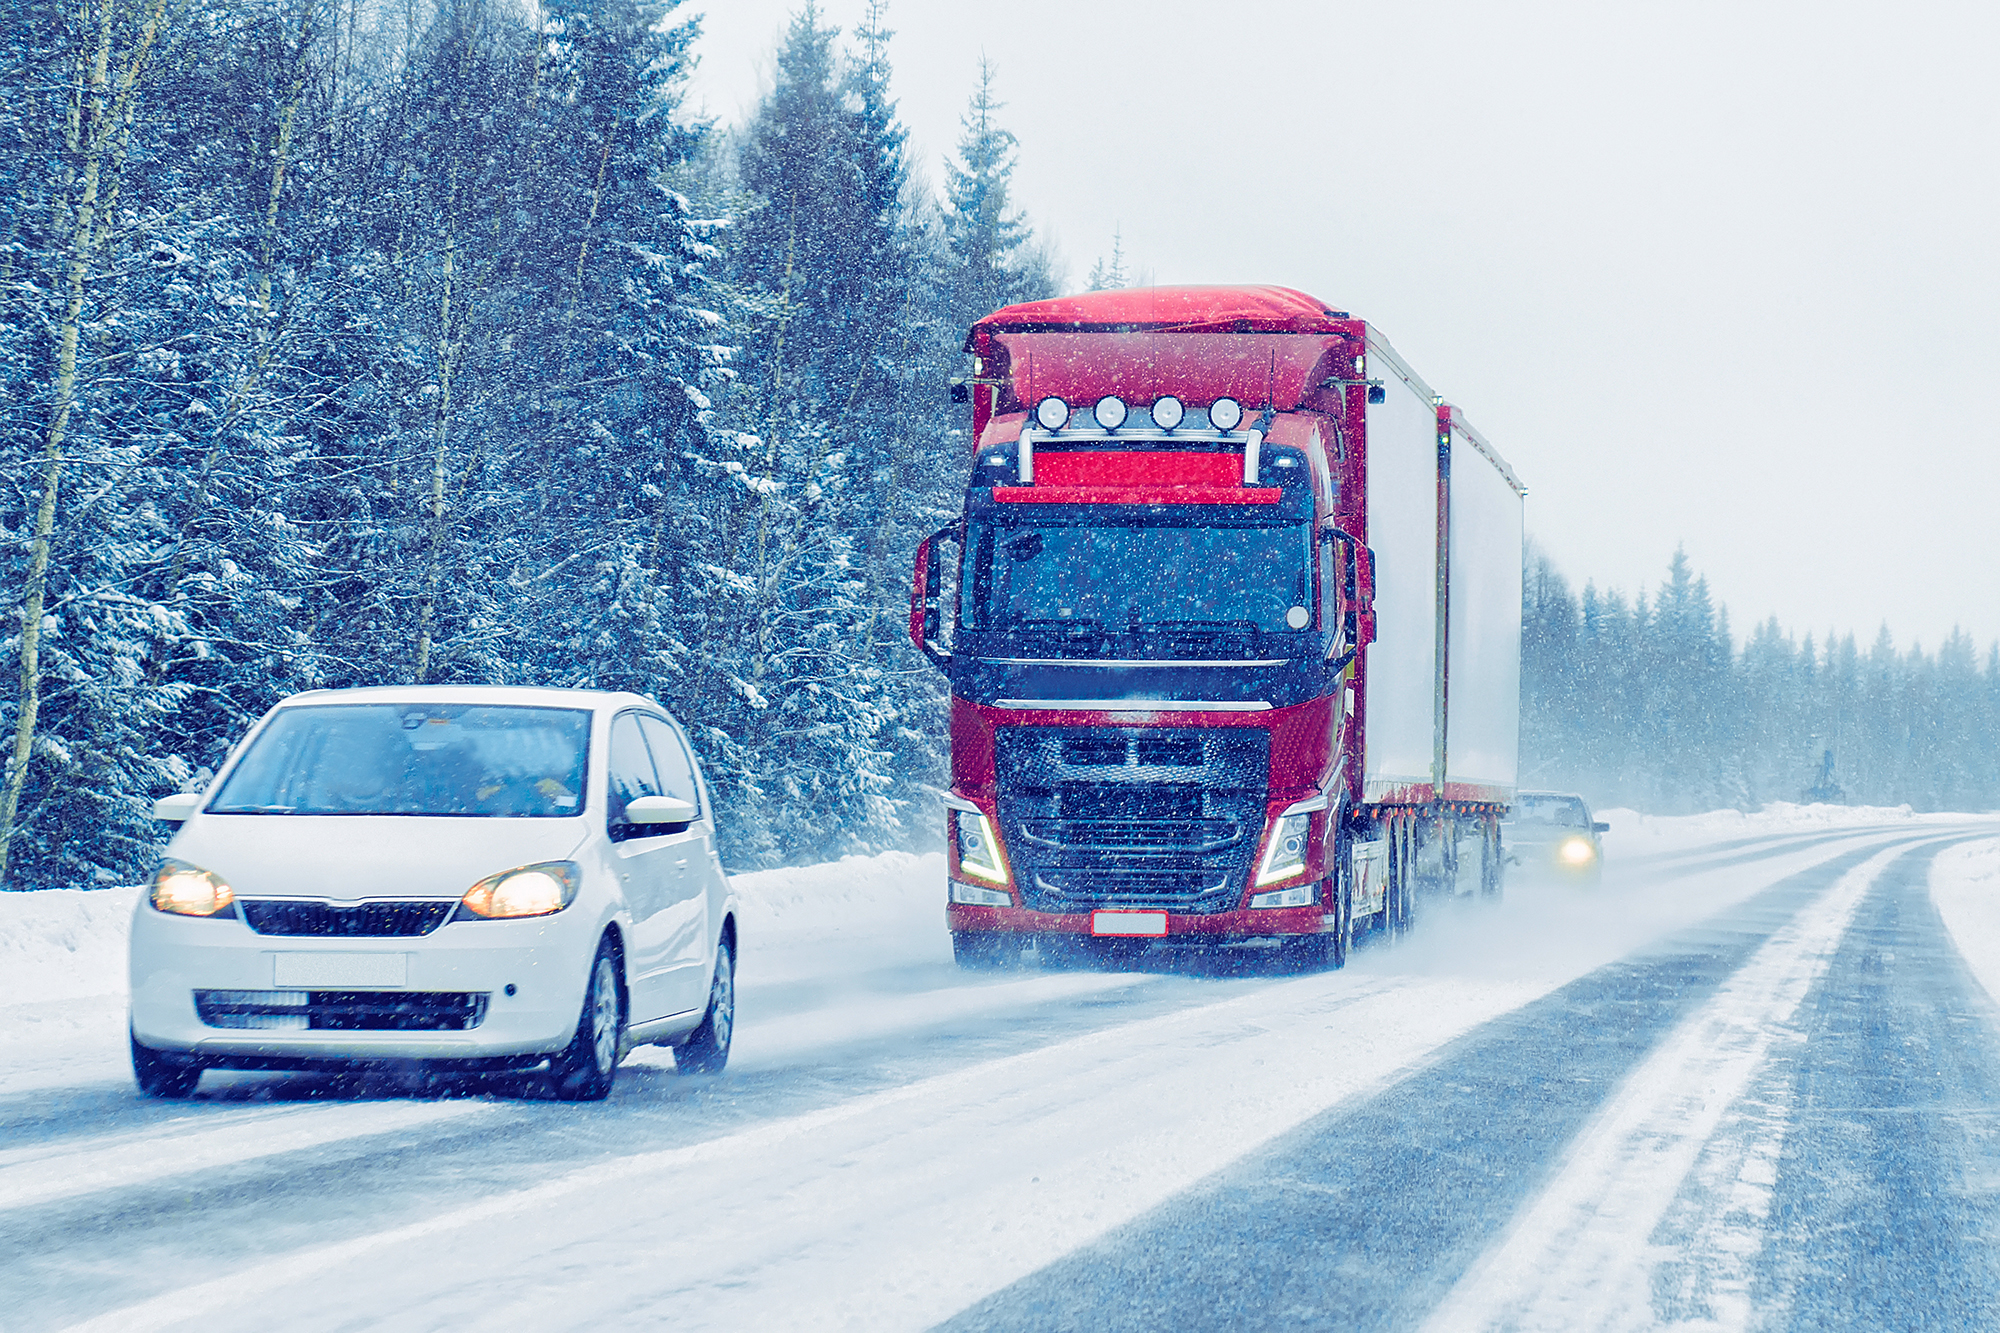 Star Freight navigating snow capped challenges.